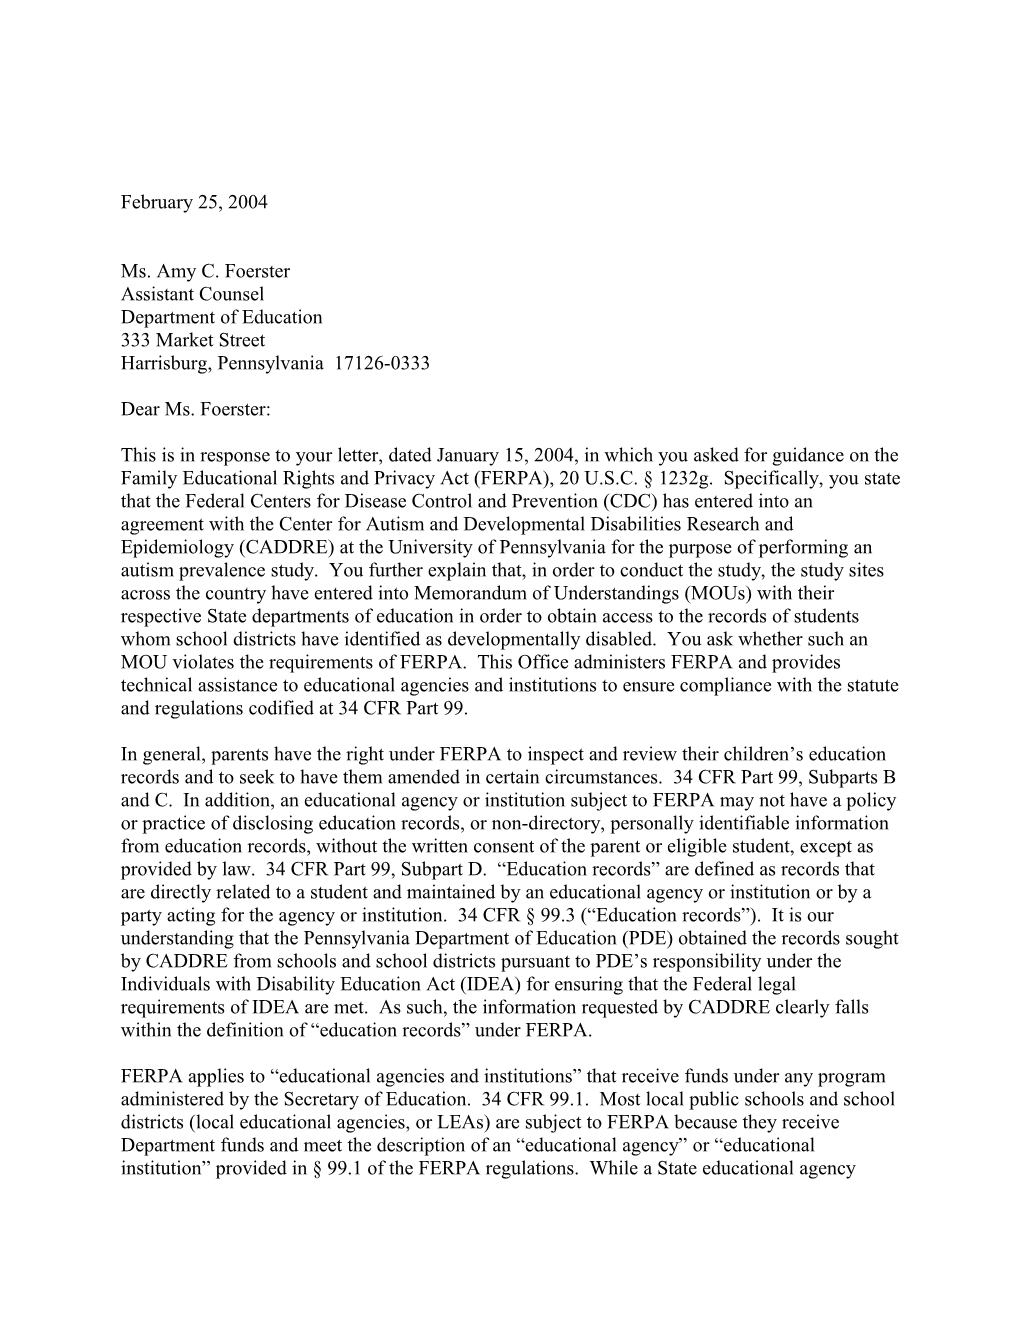 FERPA Online Library - Letter of Disclosure of Immunization Records to AL DOE (Msword)